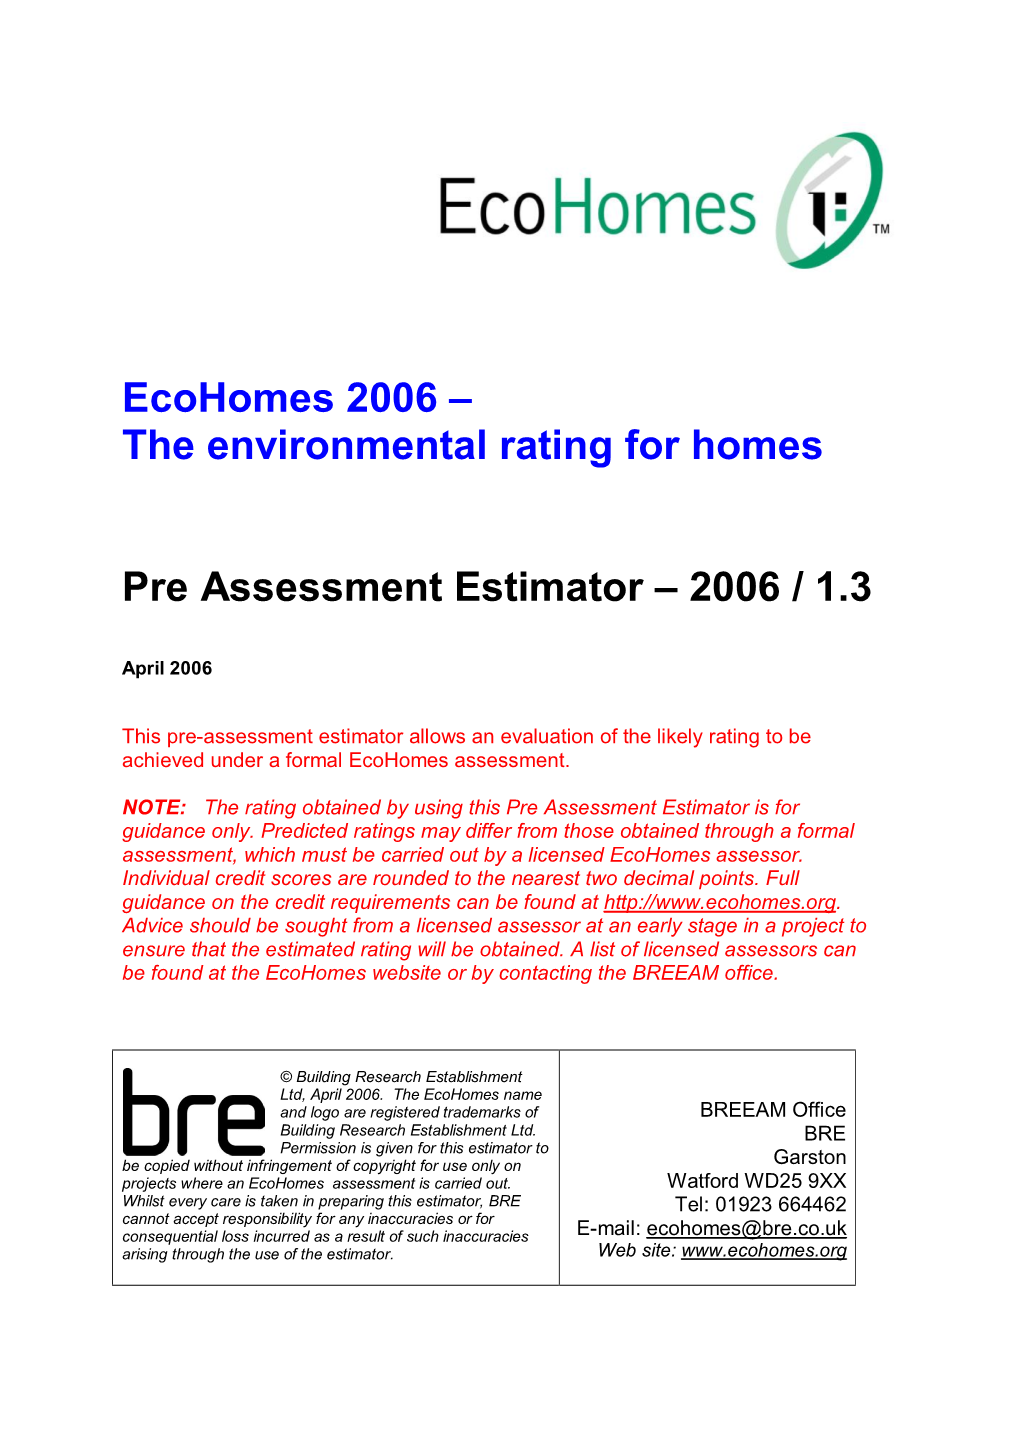 Ecohomes 2006 – the Environmental Rating for Homes Pre